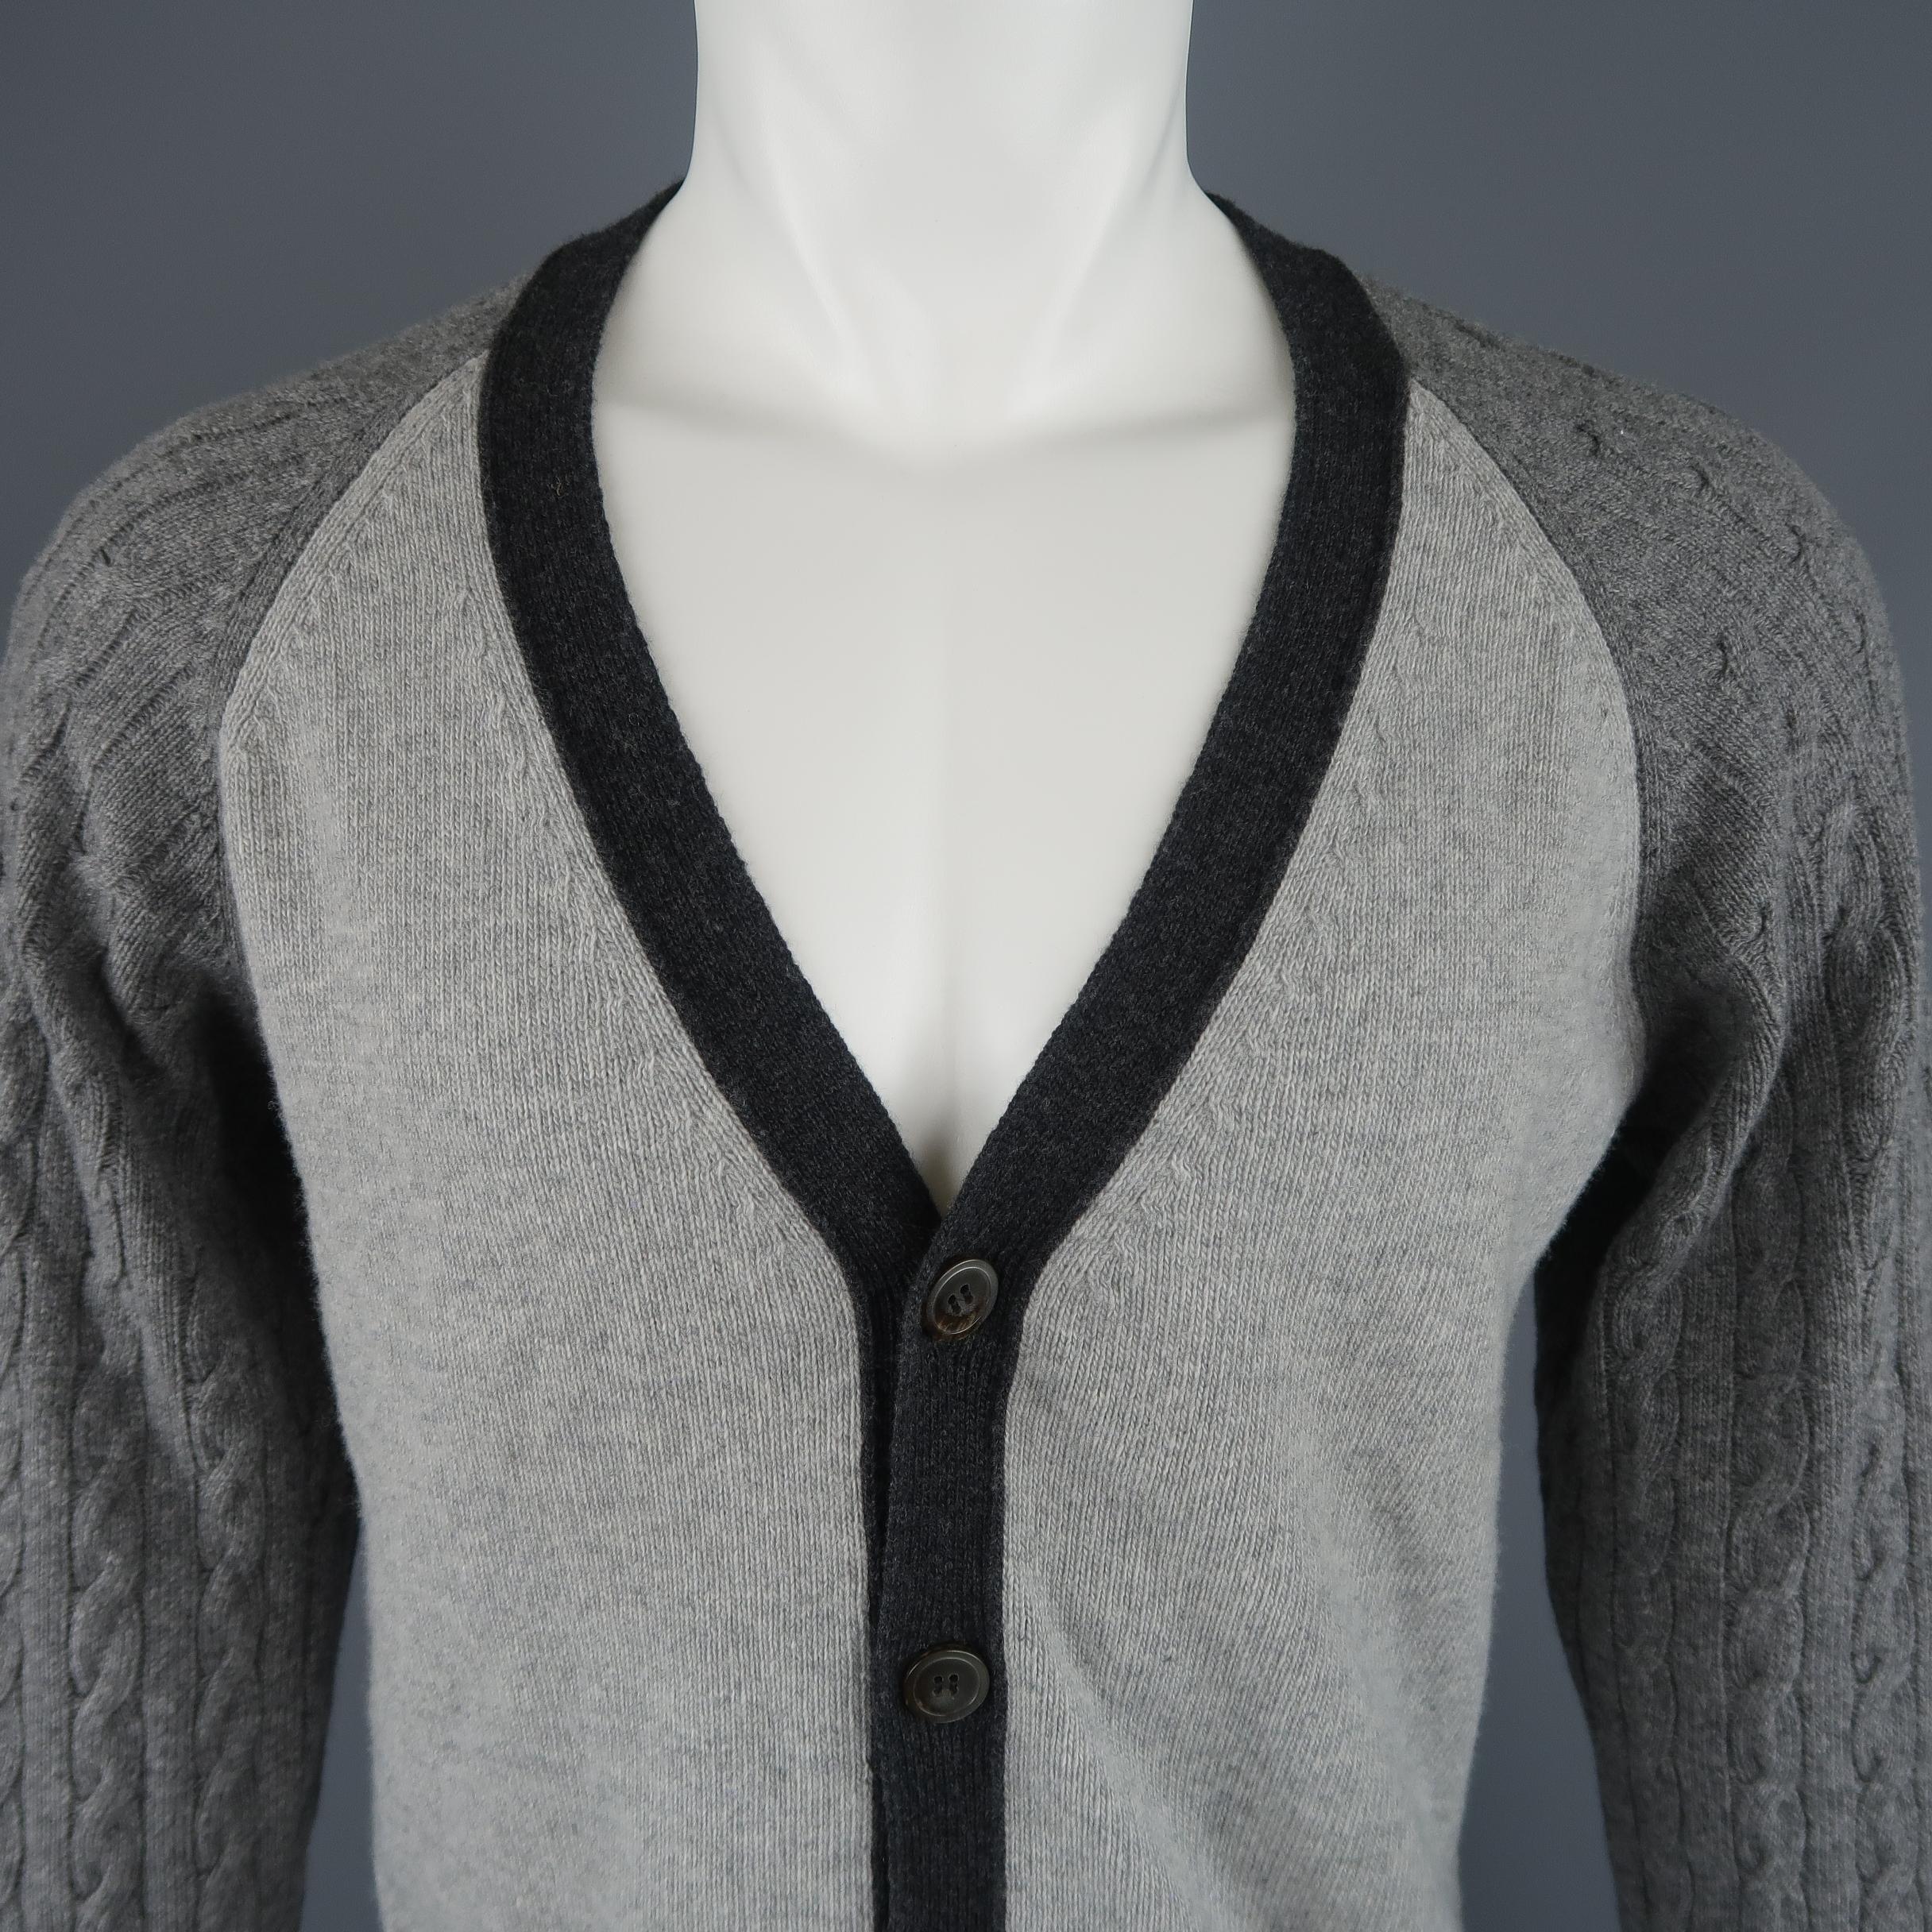 OFFICINE GENERALE color block cardigan comes in a wool cashmere blend knit with a V neck, light bray body, charcoal trim, and heather gray cable knit raglan sleeves. Made in Italy.
 
Excellent Pre-Owned Condition.
Marked: M
 
Measurements:
